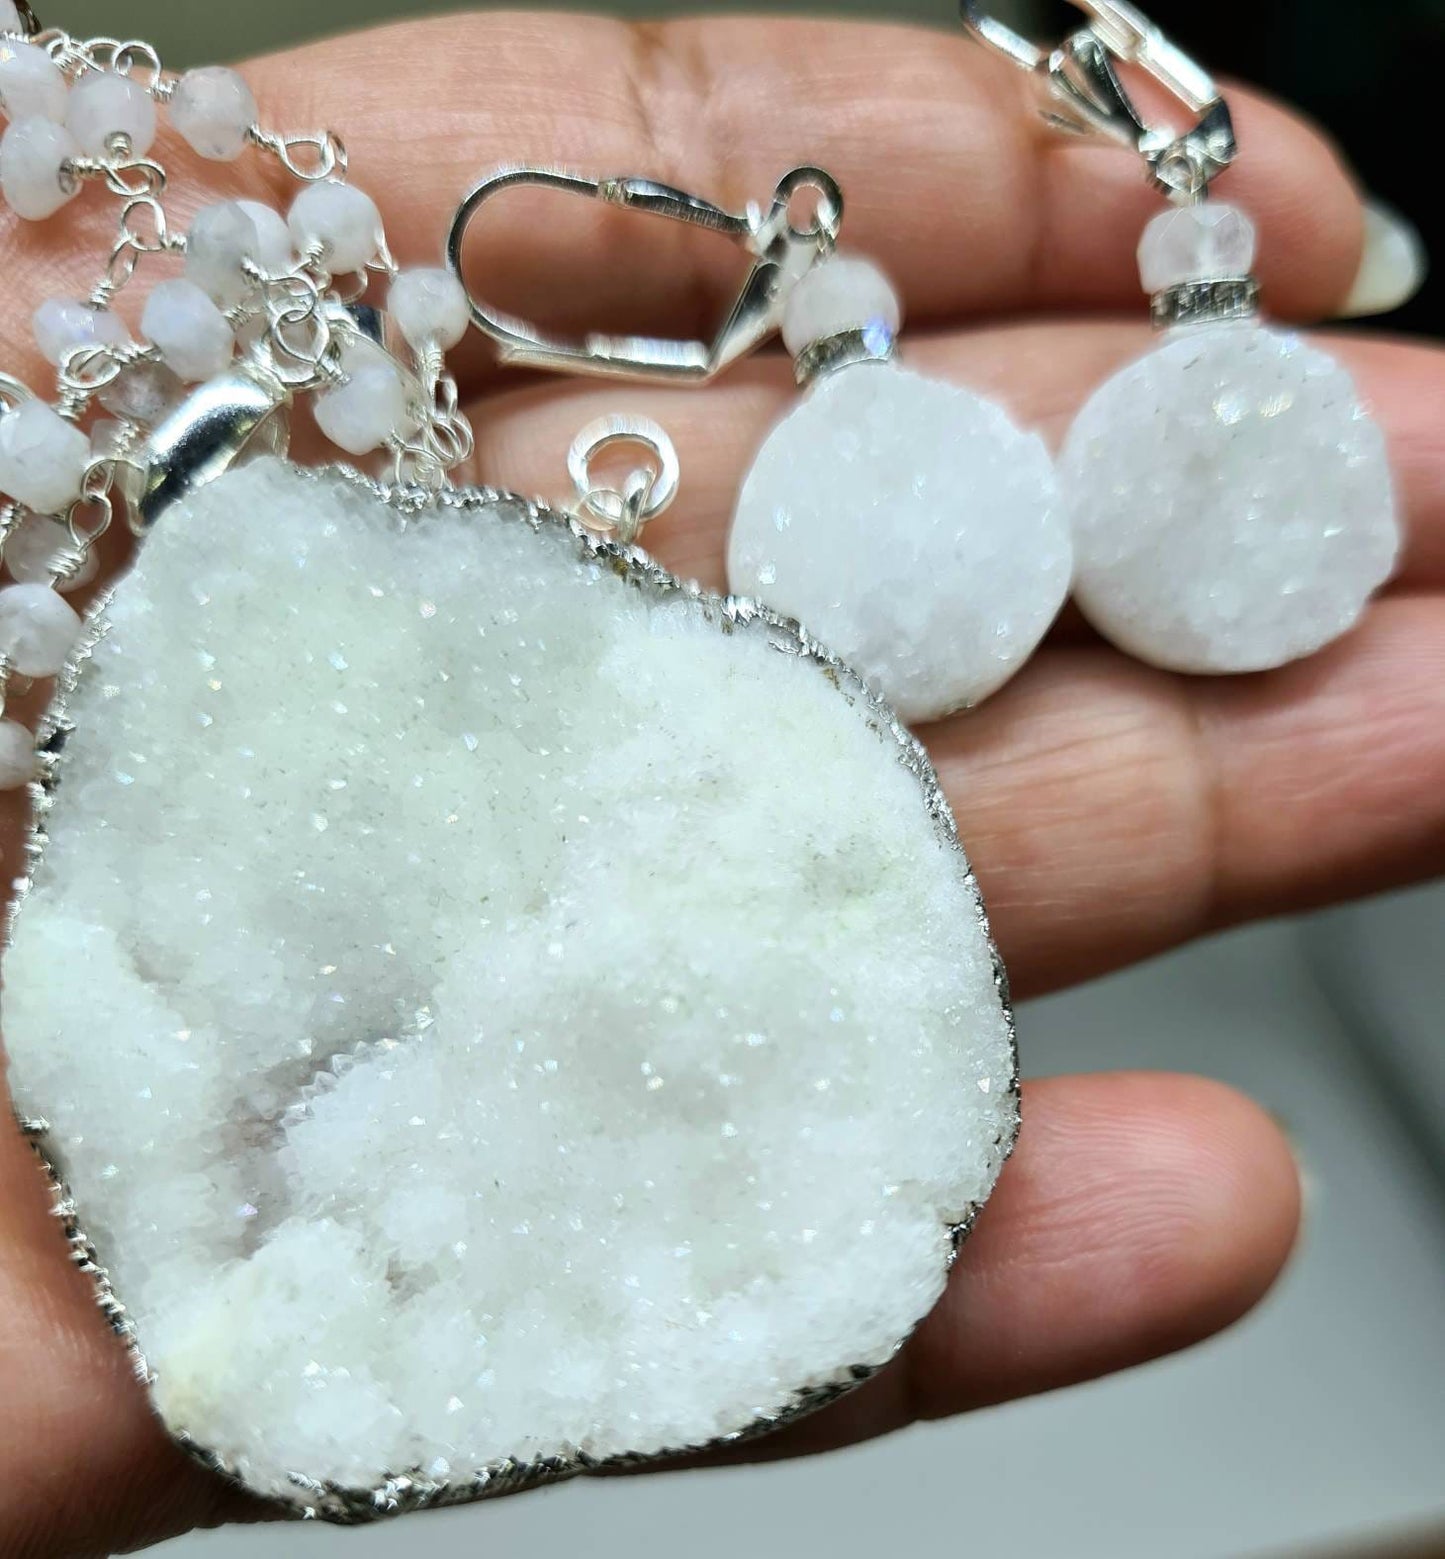 White Druzy Agate Geode Pendant Necklace, Earrings Set, Sparkling Druzy Earrings, Pendant Moonstone Rosary Chain in Sterling Silver Clasp